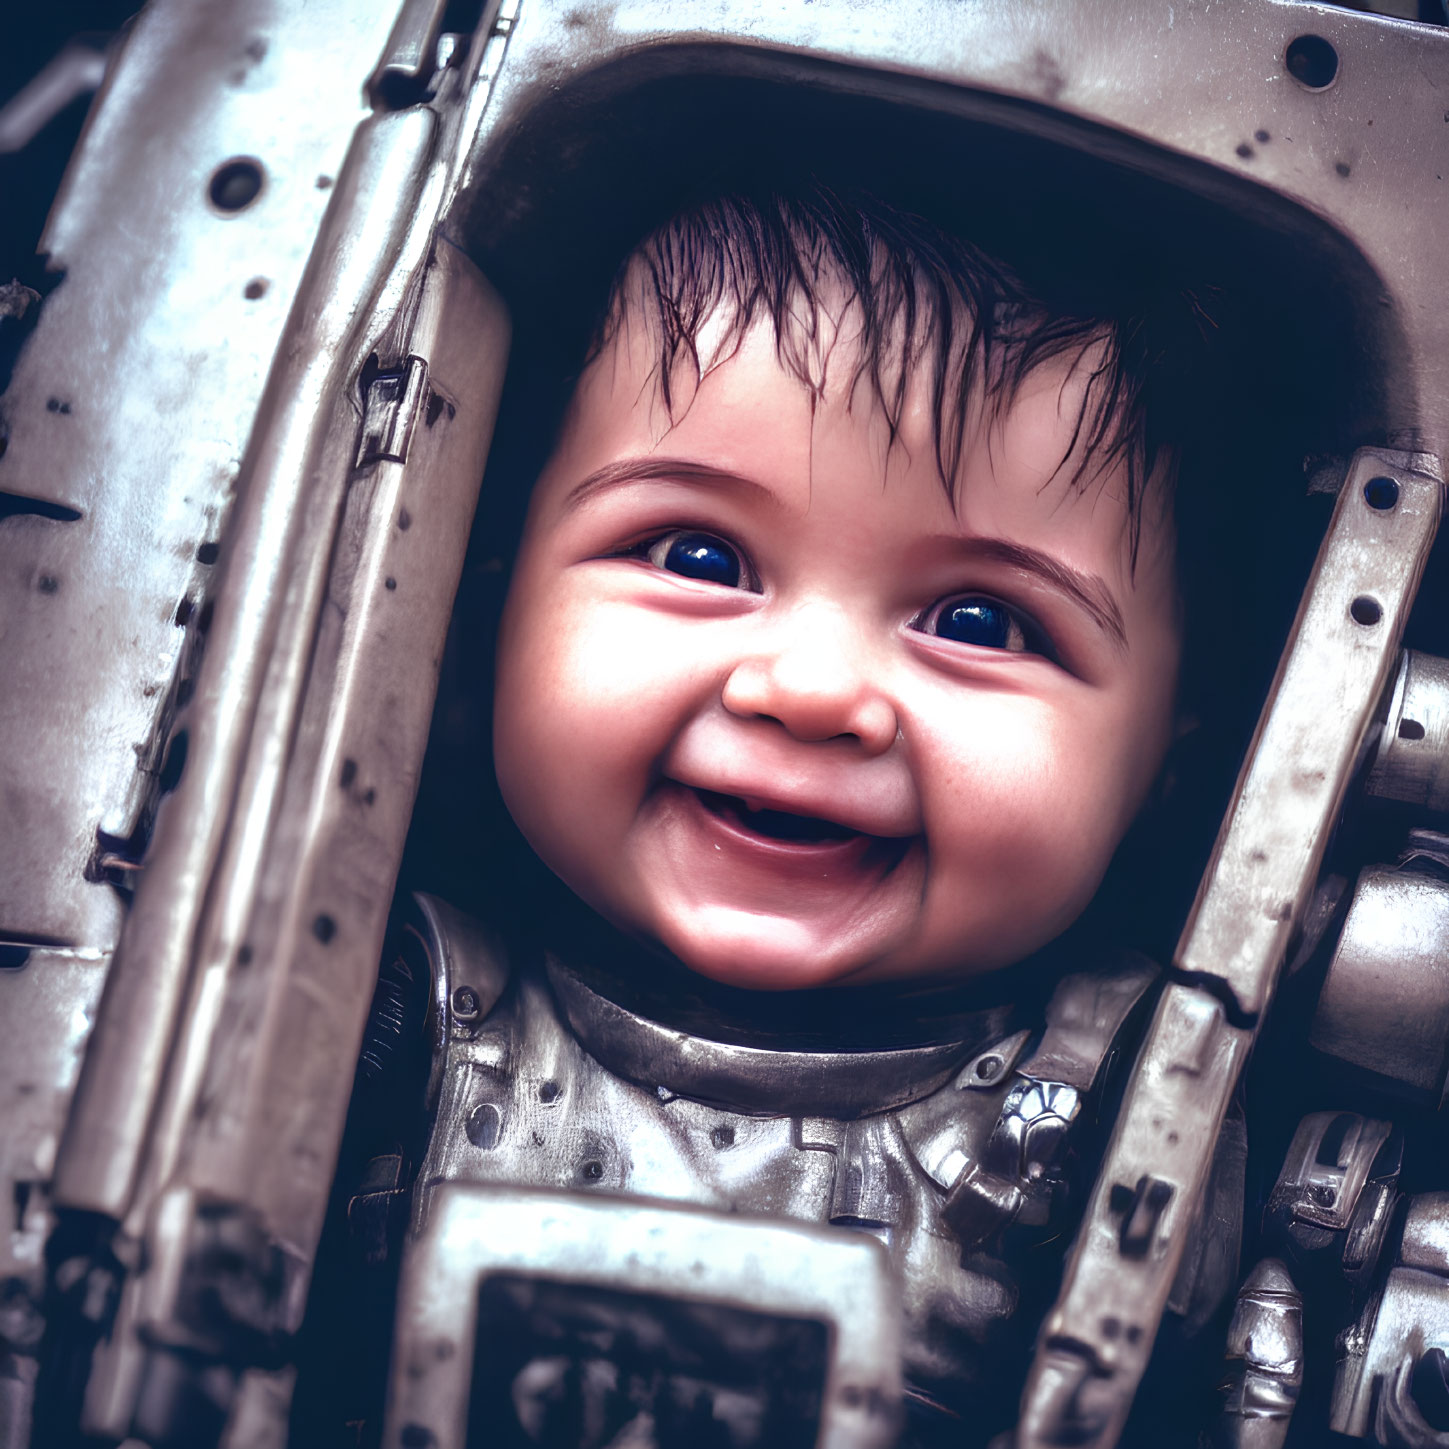 Smiling baby in metallic robotic suit with blue eyes